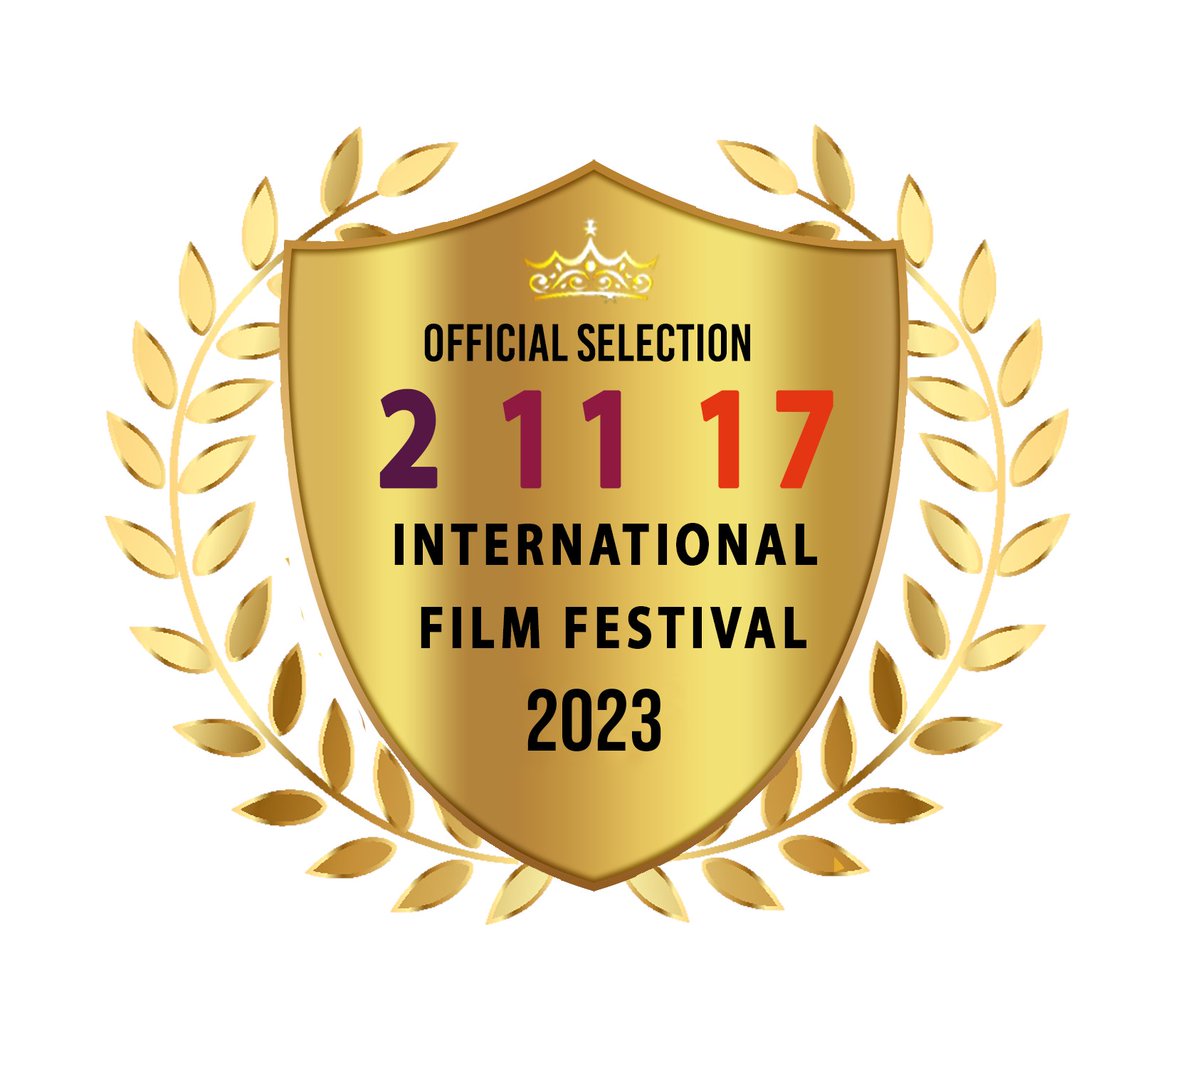 We are pleased to have been officially selected and a finalist at the '2 11 17 International Film festival' for our film 'In Spate'.